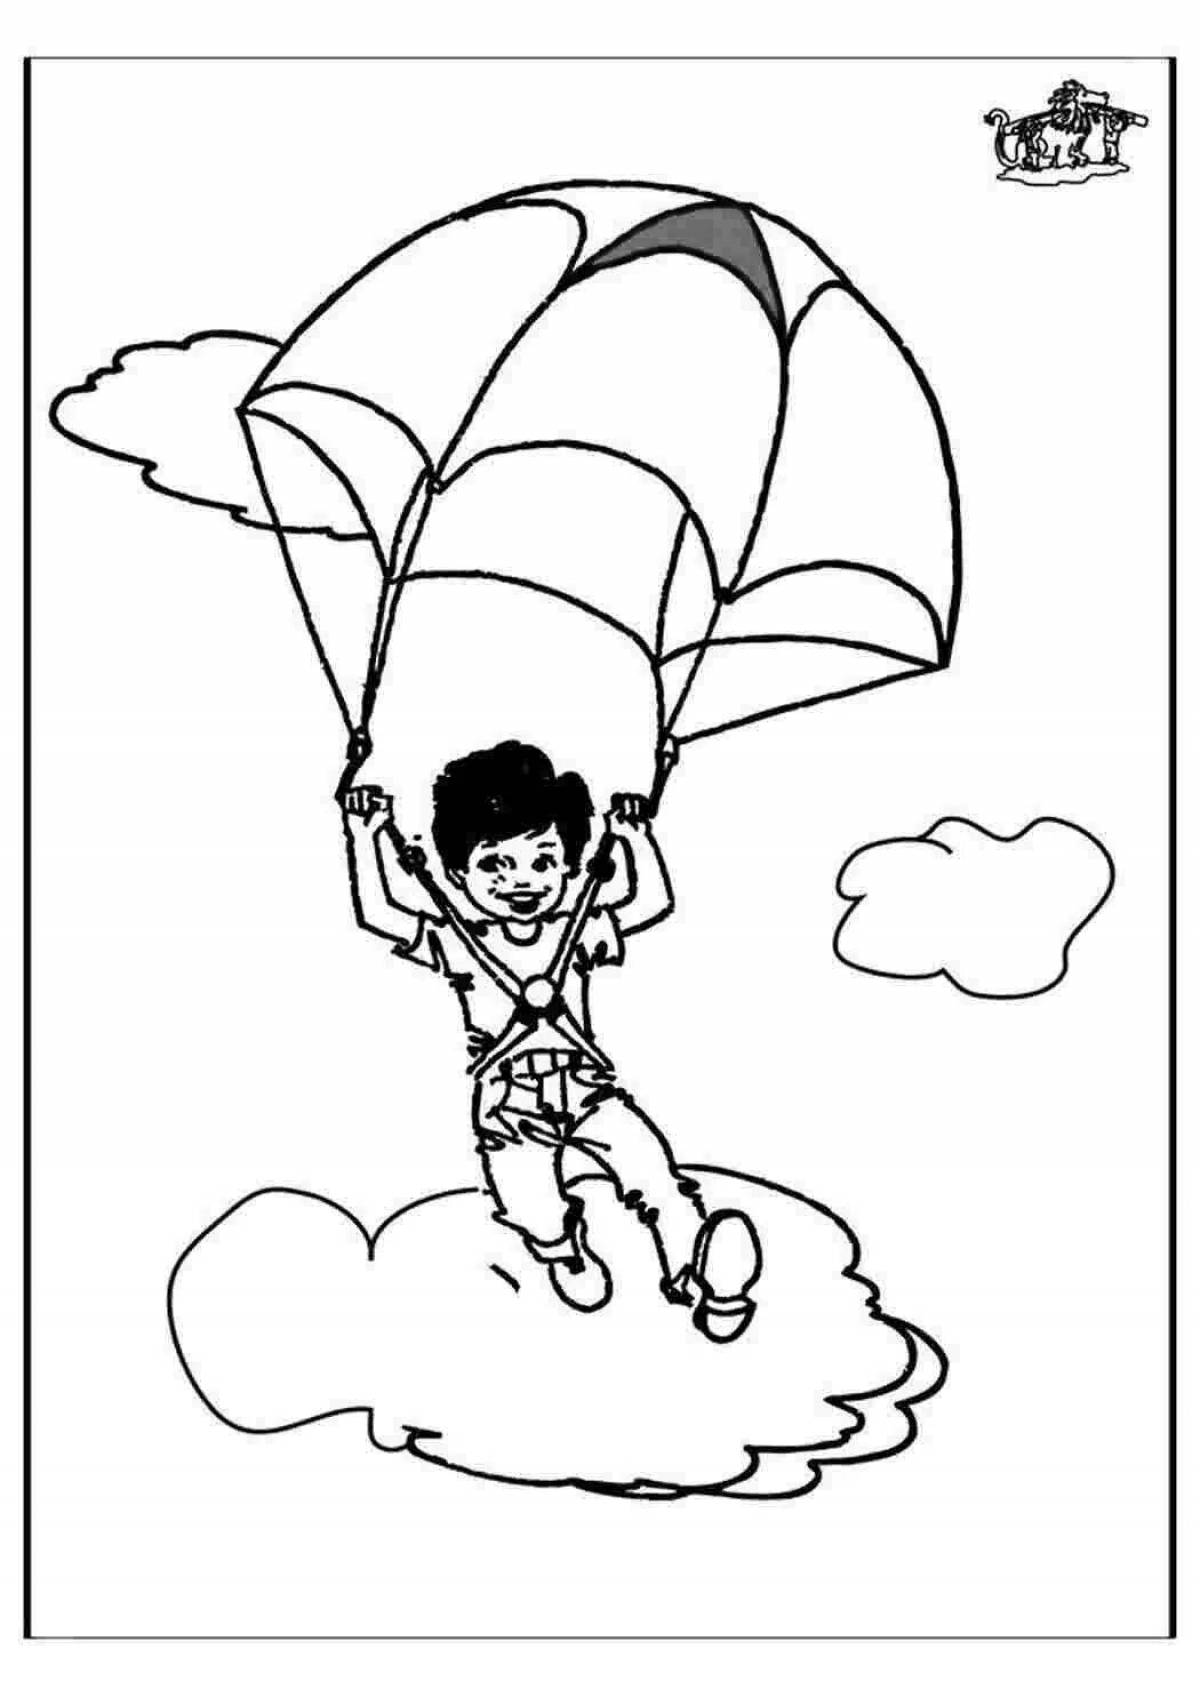 A paratrooper's fun coloring book for the little ones